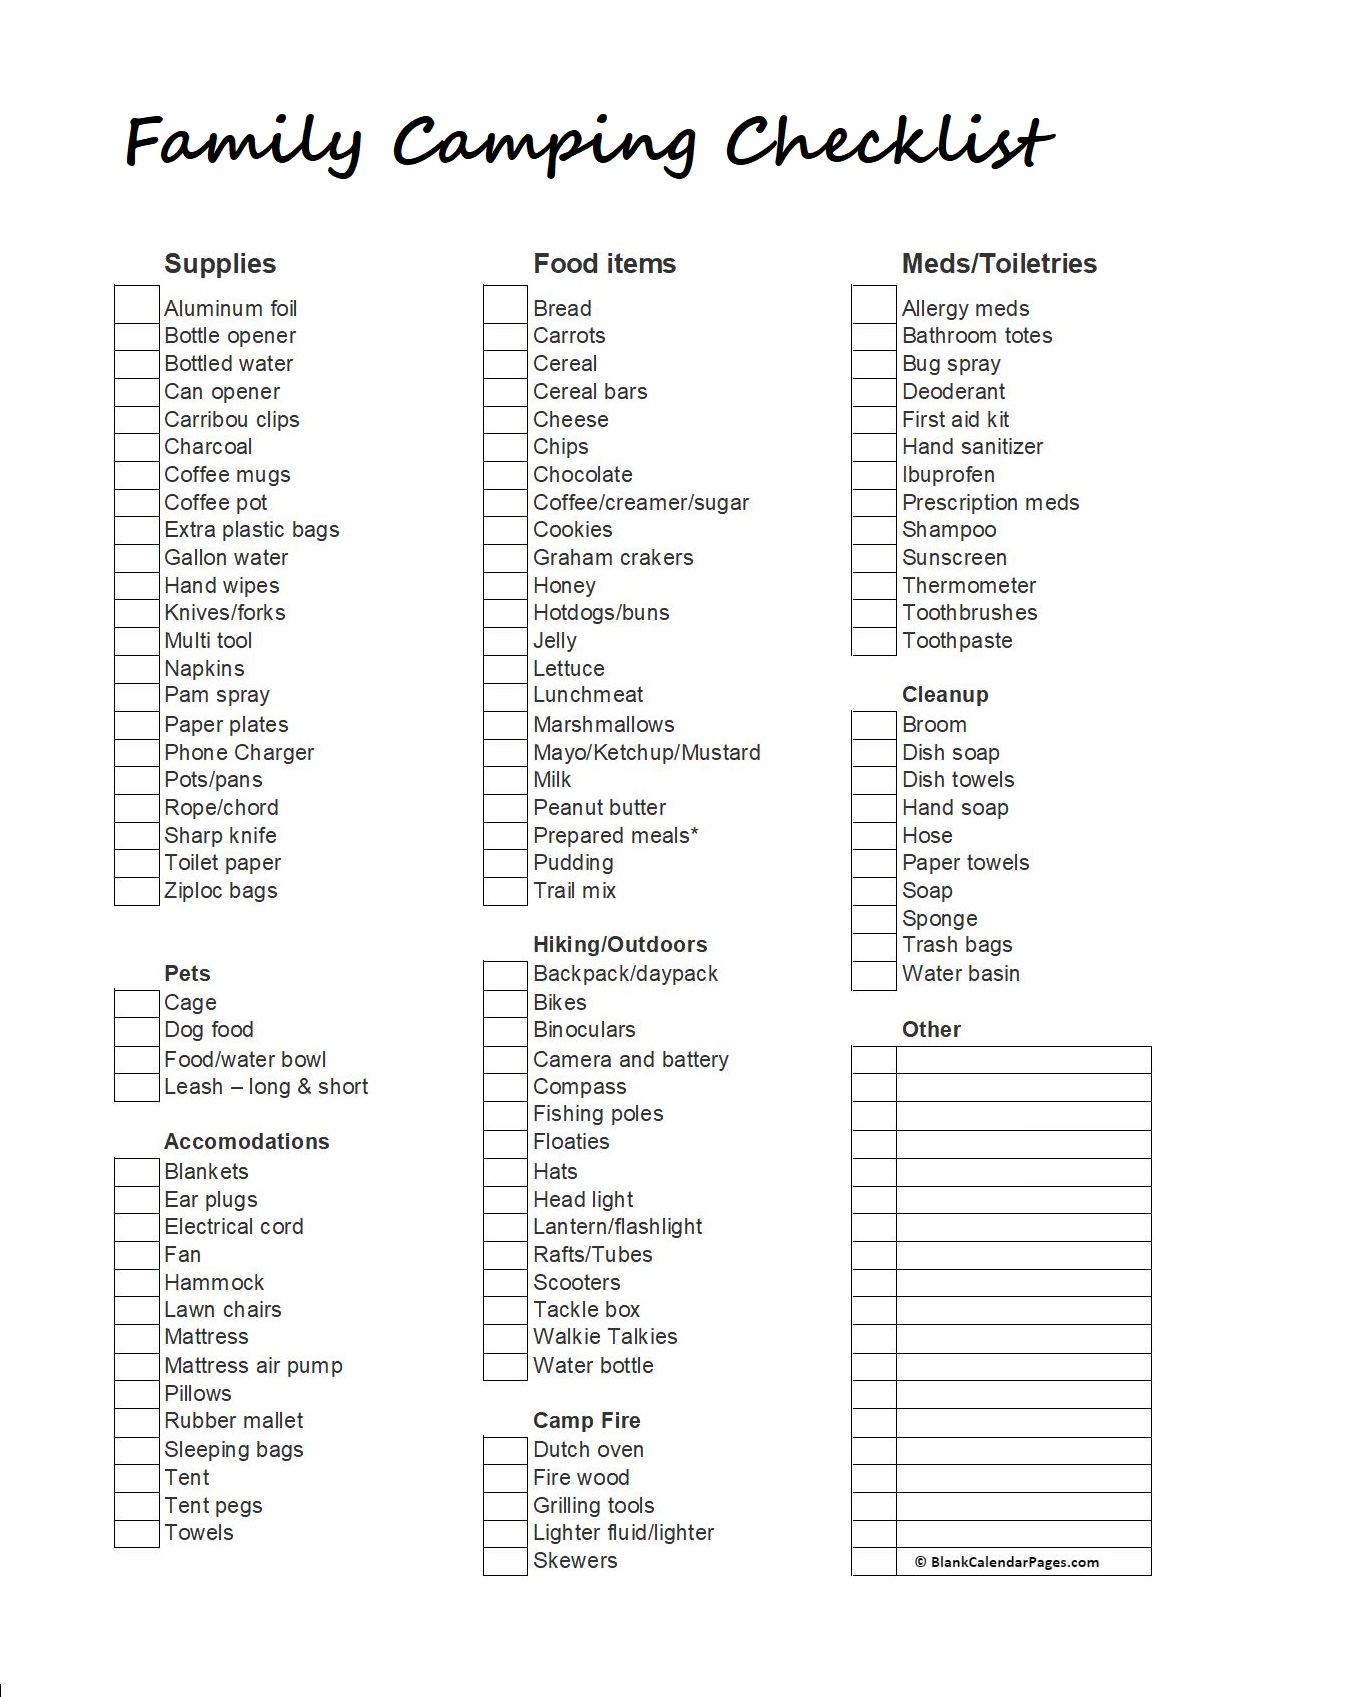 https://blankcalendarpages.com/printable_calendar/planners/camping-checklist.jpg